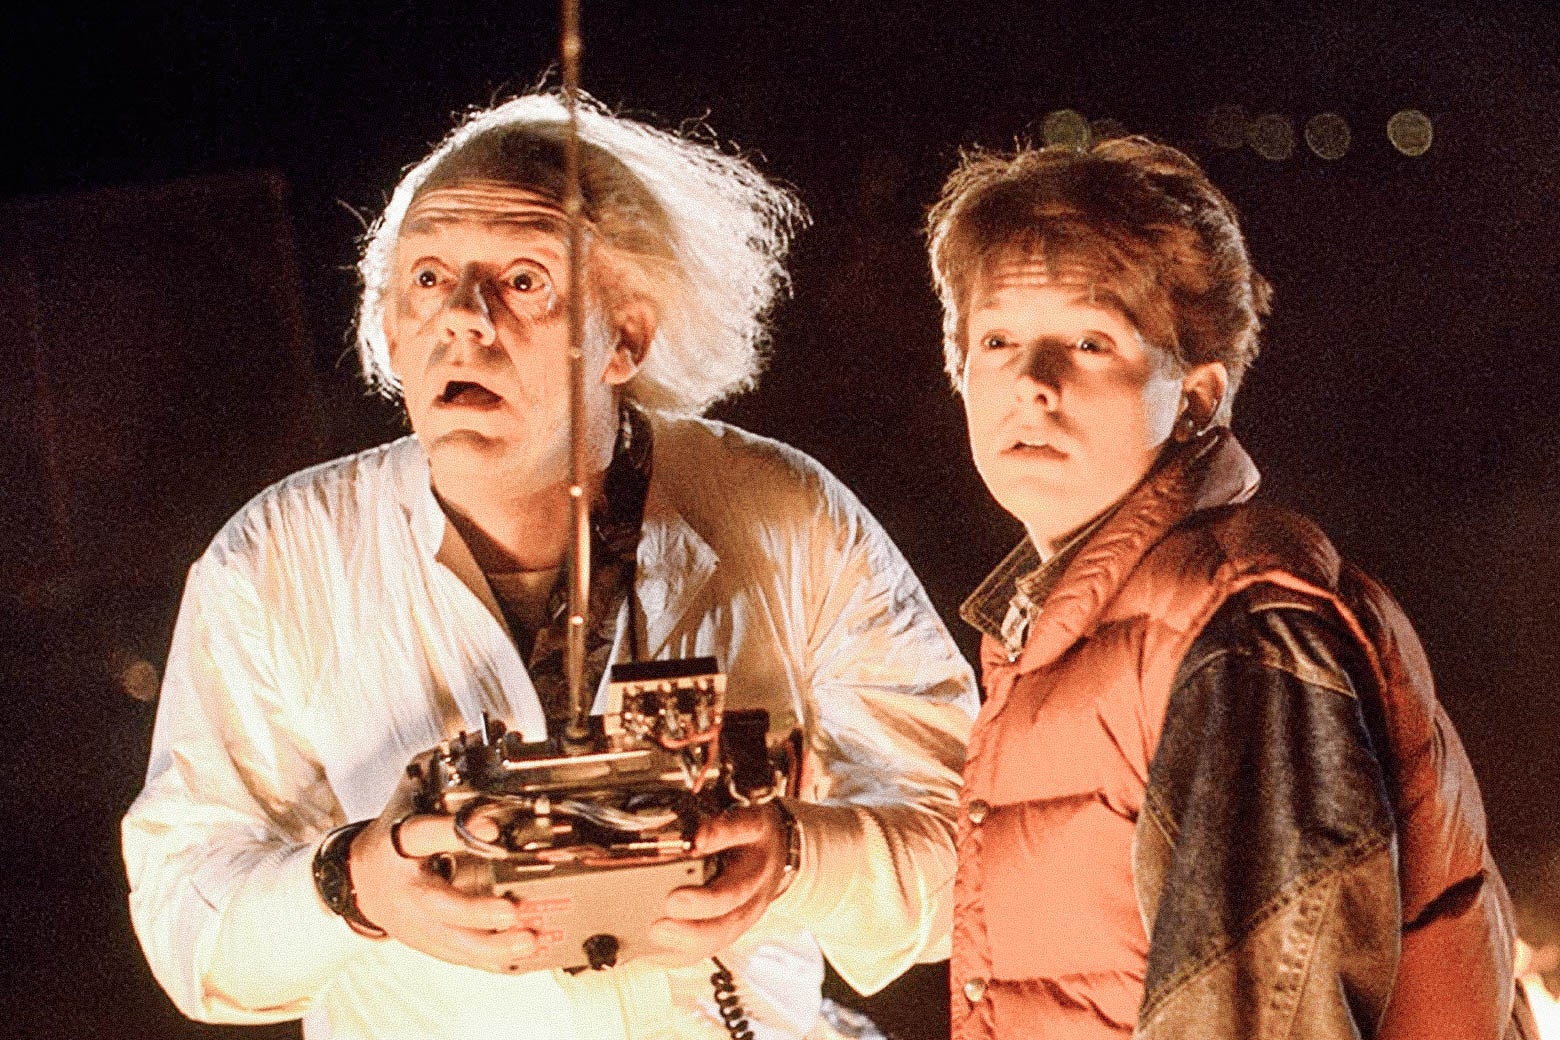 Doc Brown, with his big white hair blown back, holds a giant remote control next to Michael J. Box, in his puffy vest, in Back to the Future